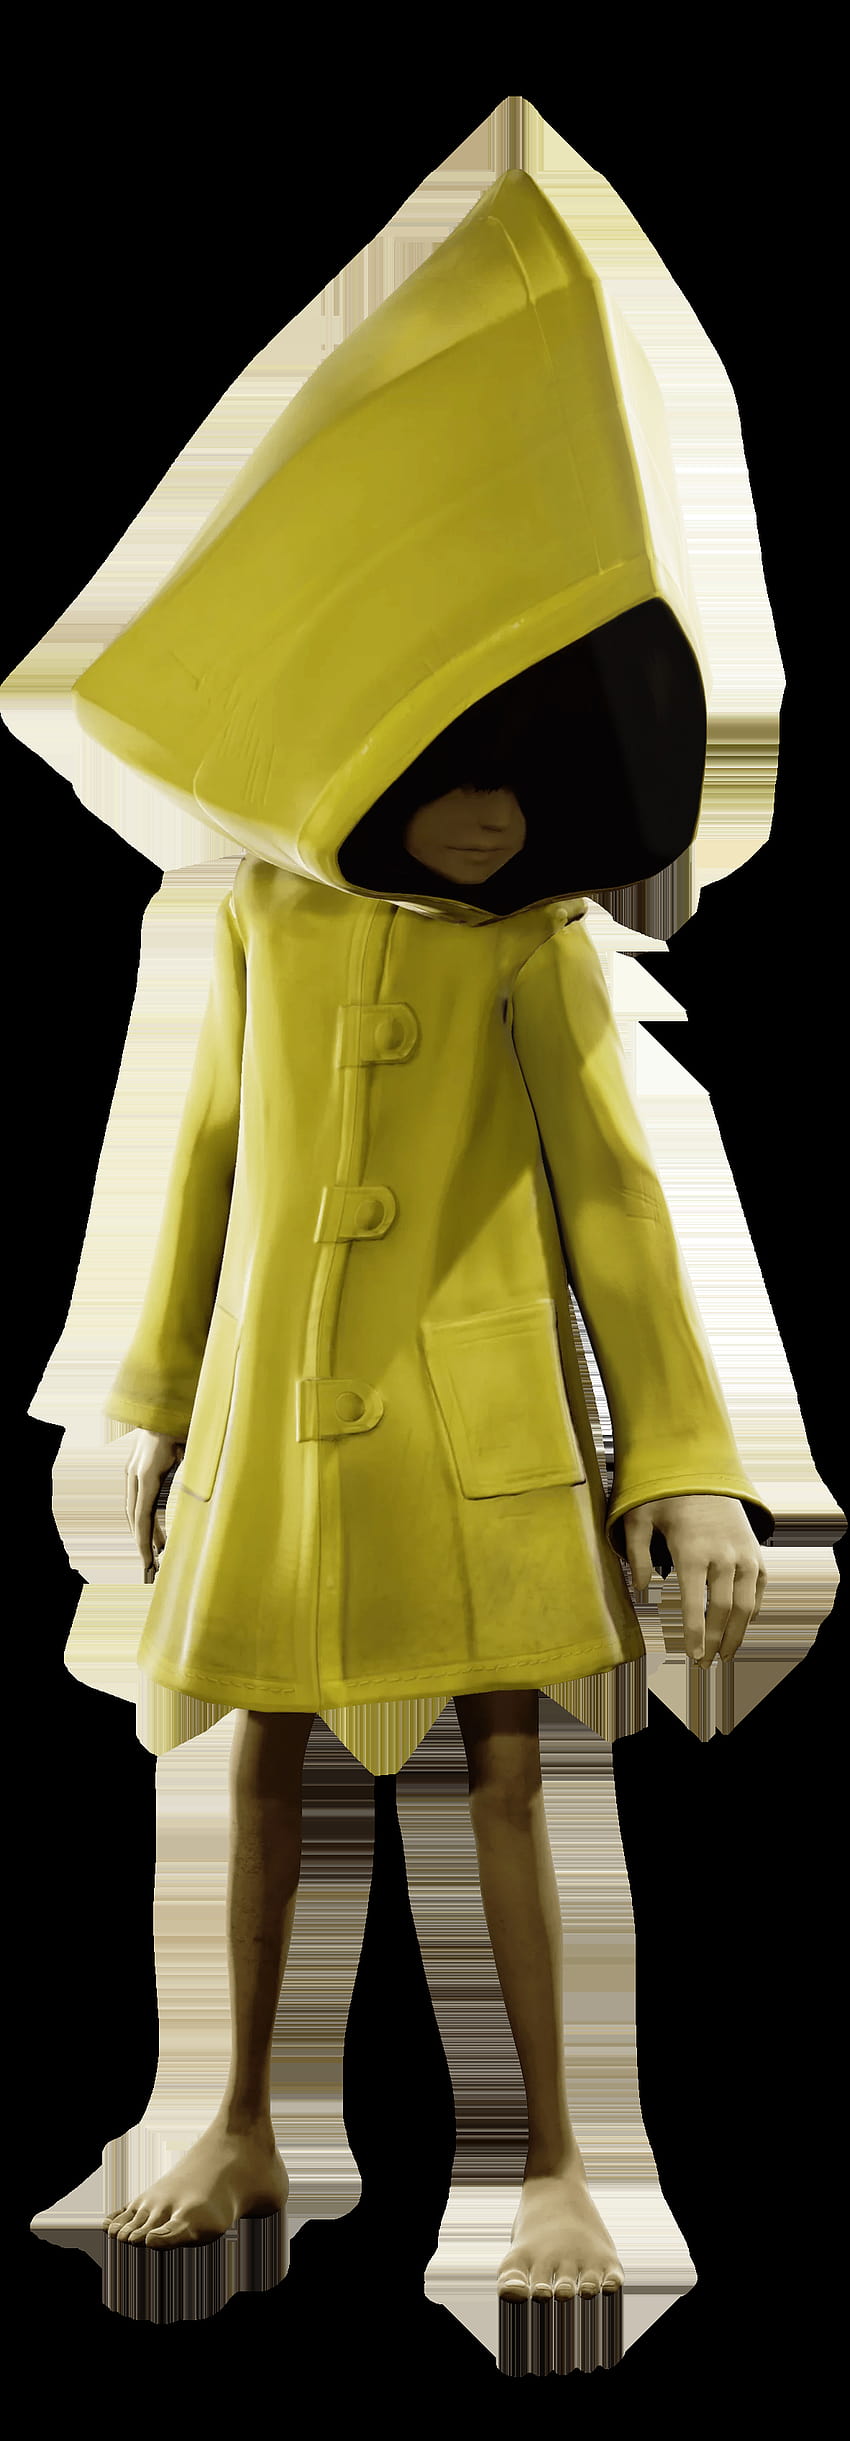 Little Nightmares Story and Ending Explained